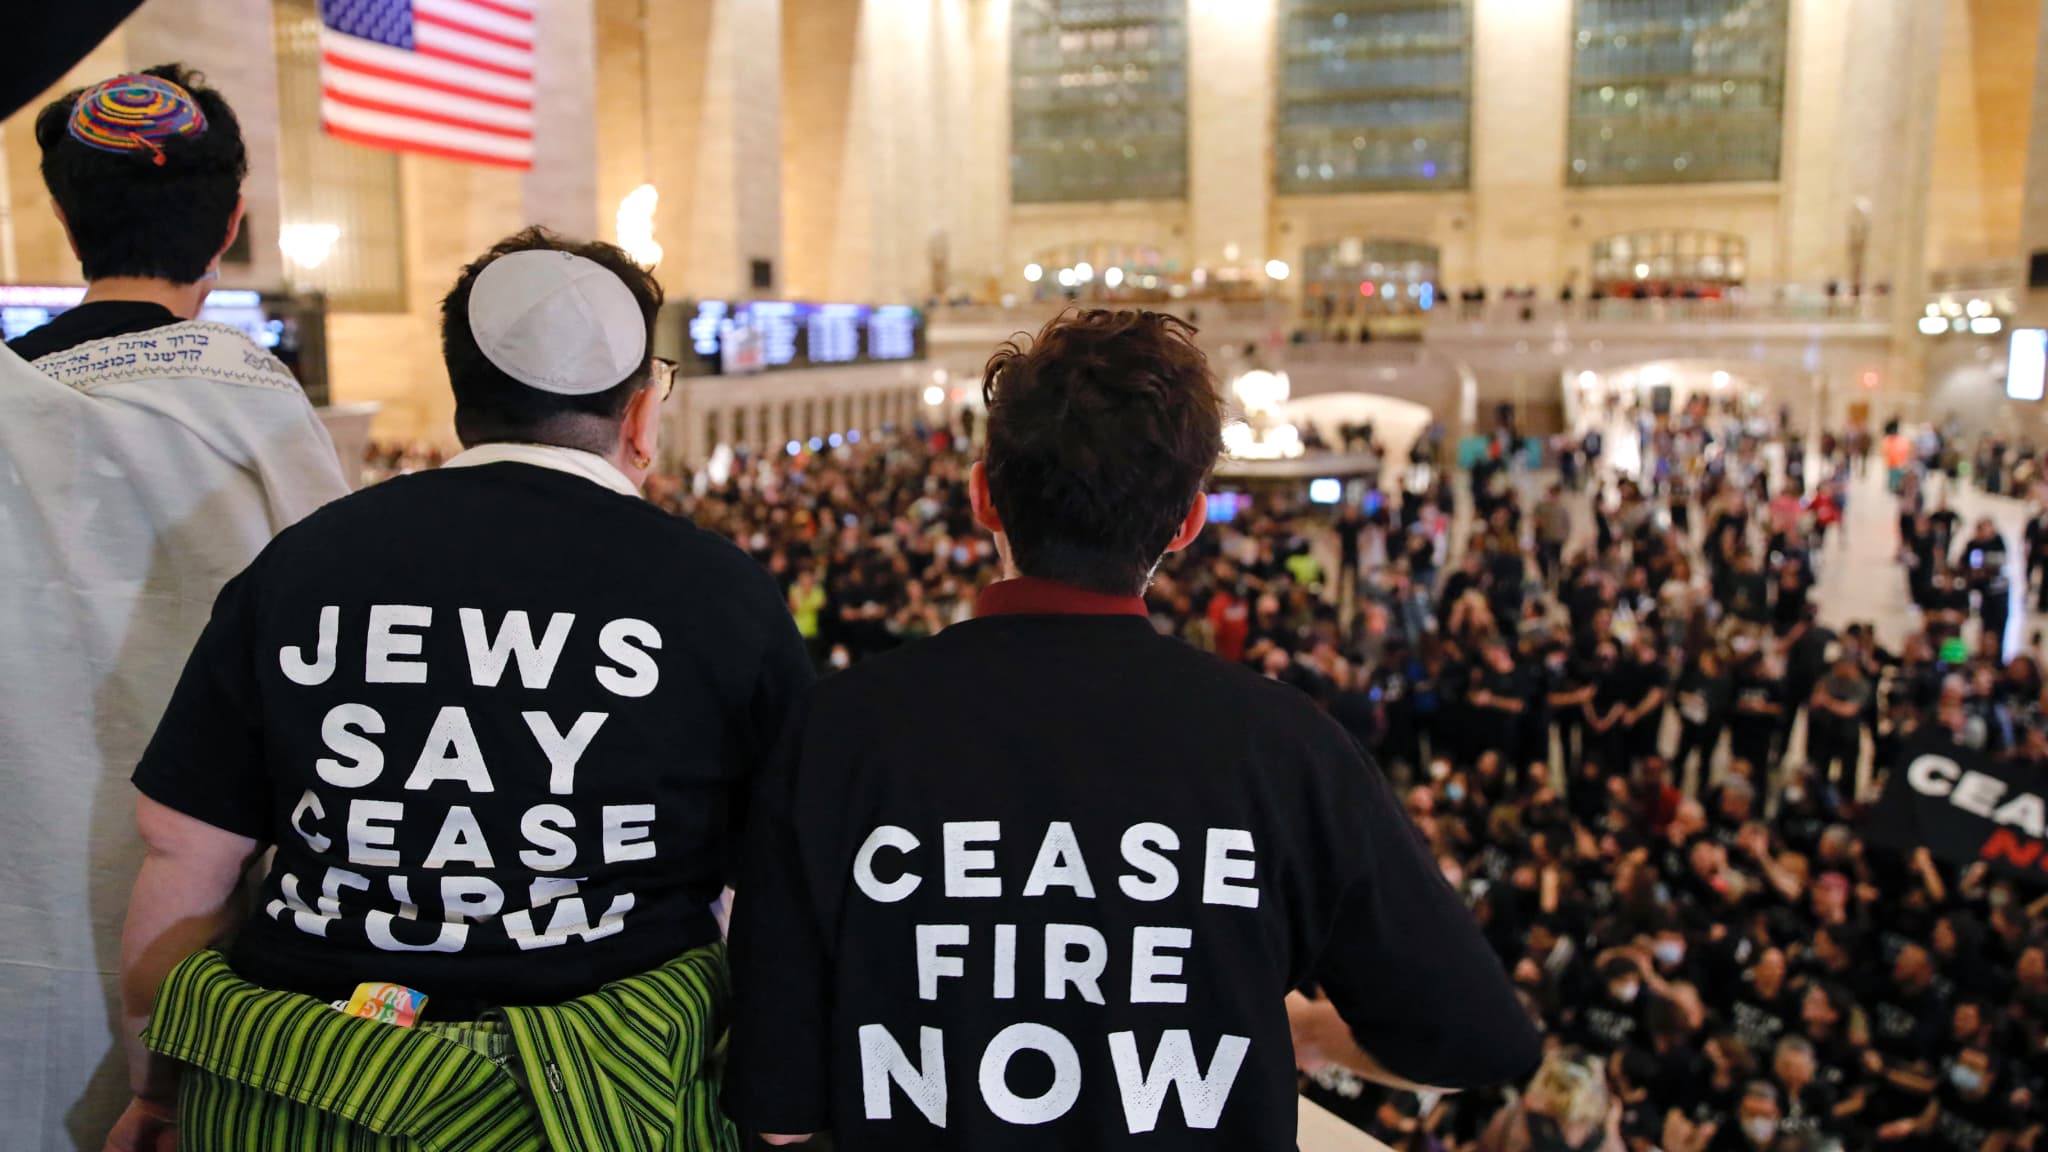 Hundreds arrested during a Jewish protest in New York for a ceasefire in Gaza